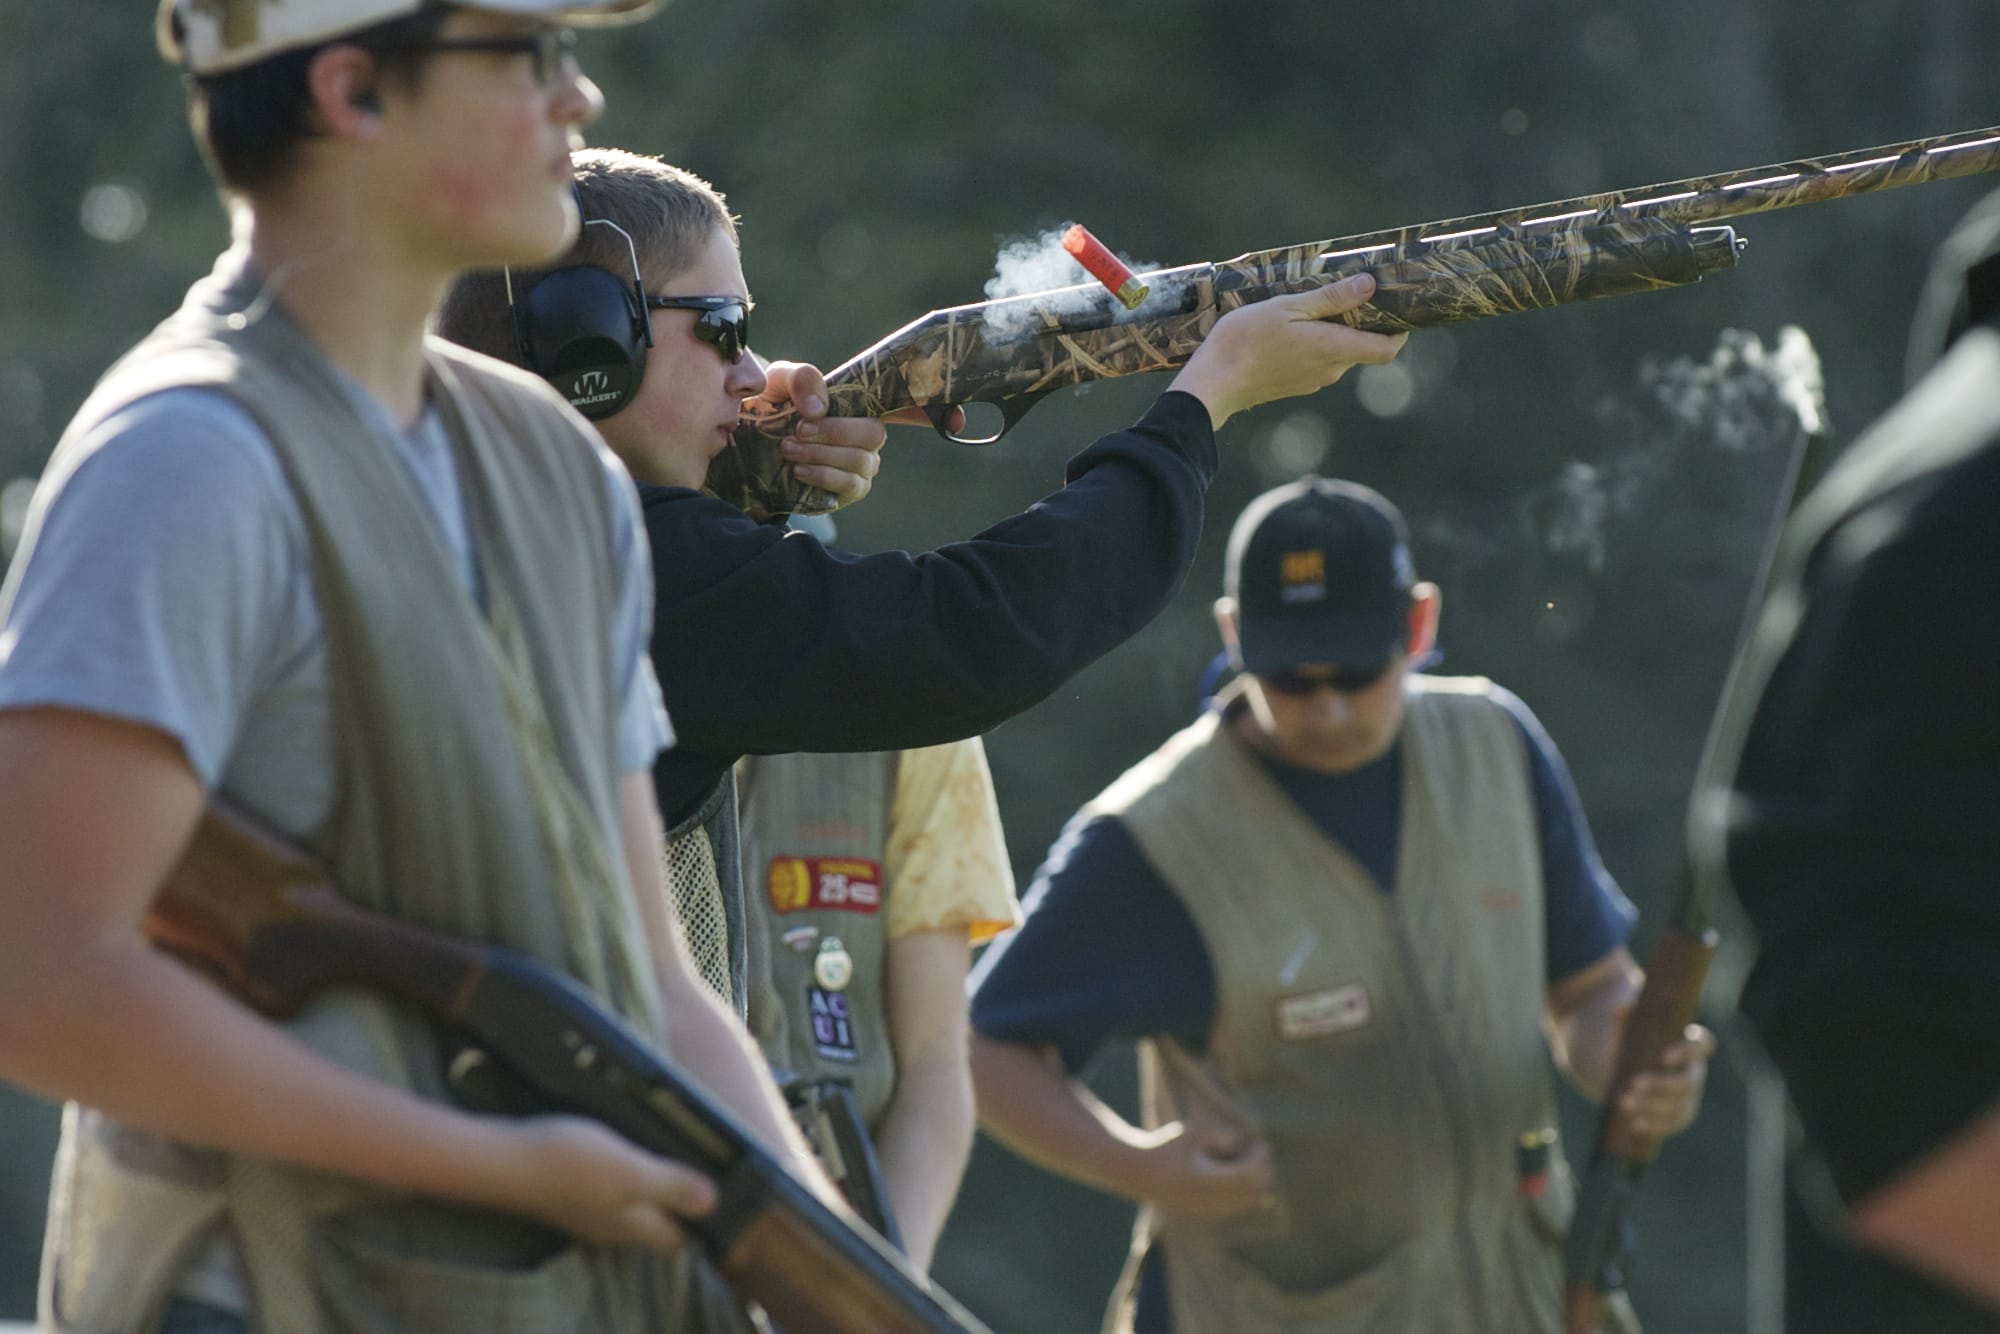 Woodland High School is the only local high school with a trap-shooting club. They practice at Rainier Rod and Gun Cub in Rainier, Oregon, Thursday, April 10, 2014.